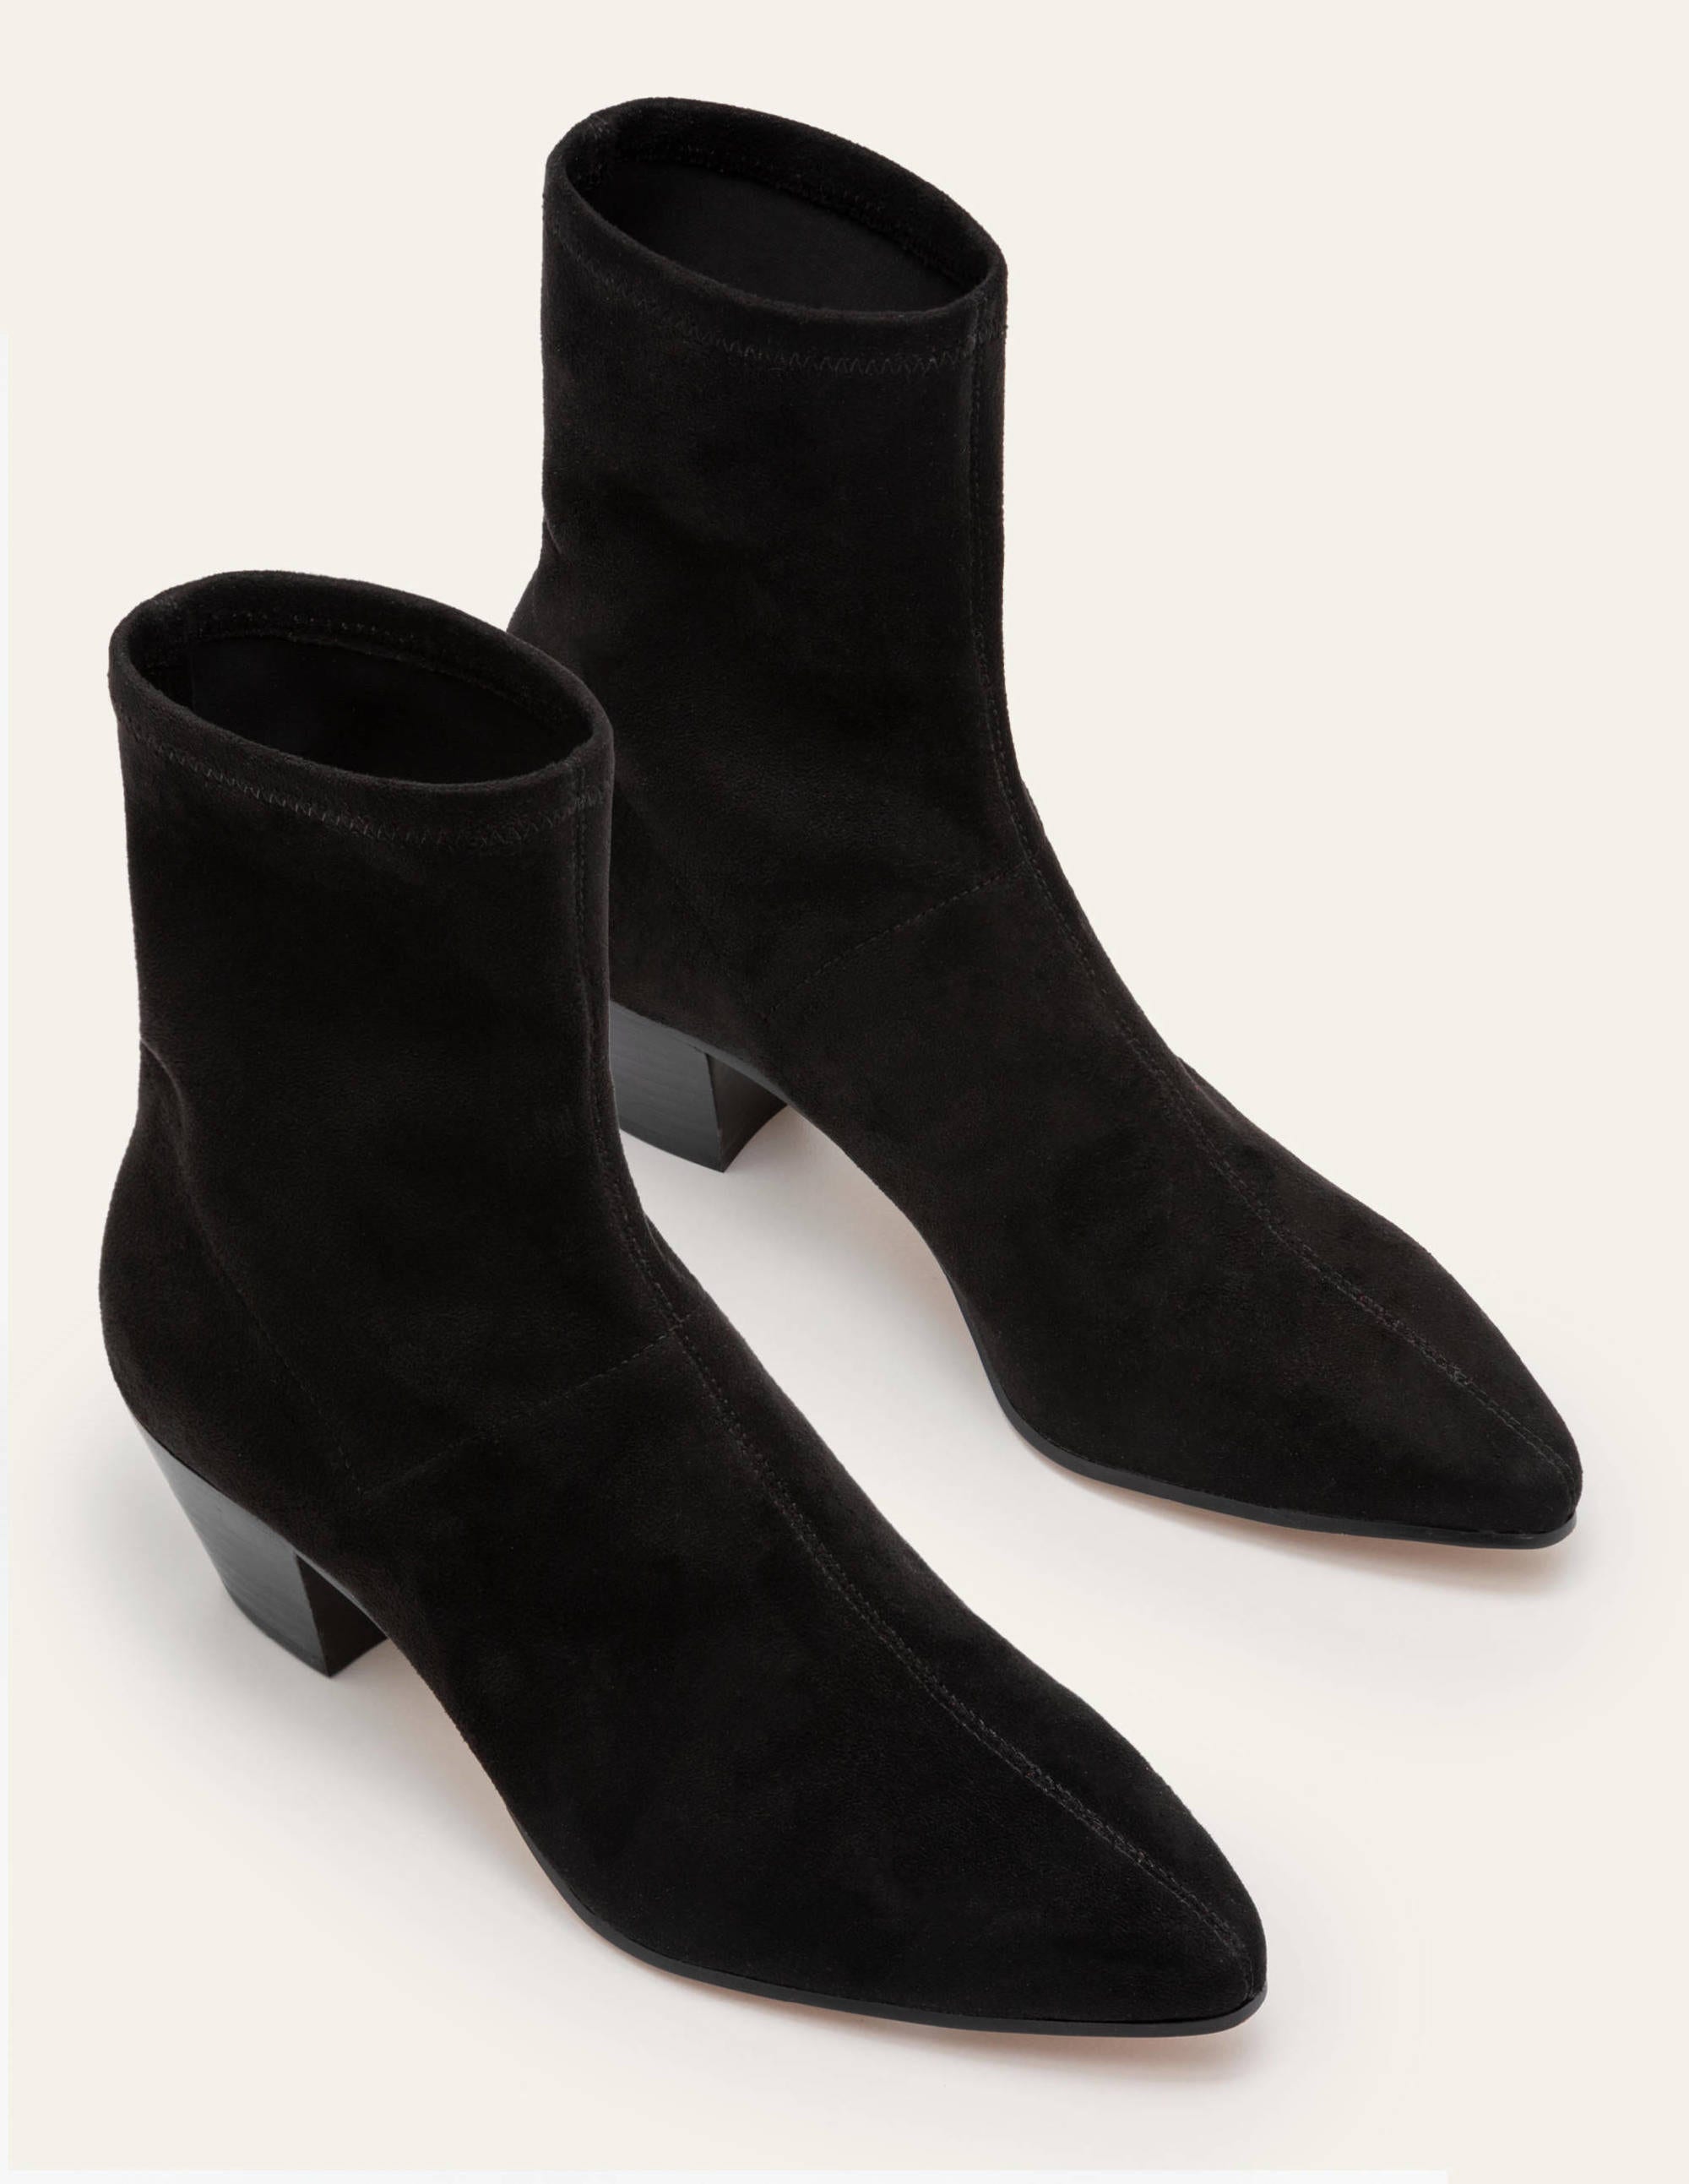 Western Stretch Boots - Black | Boden US